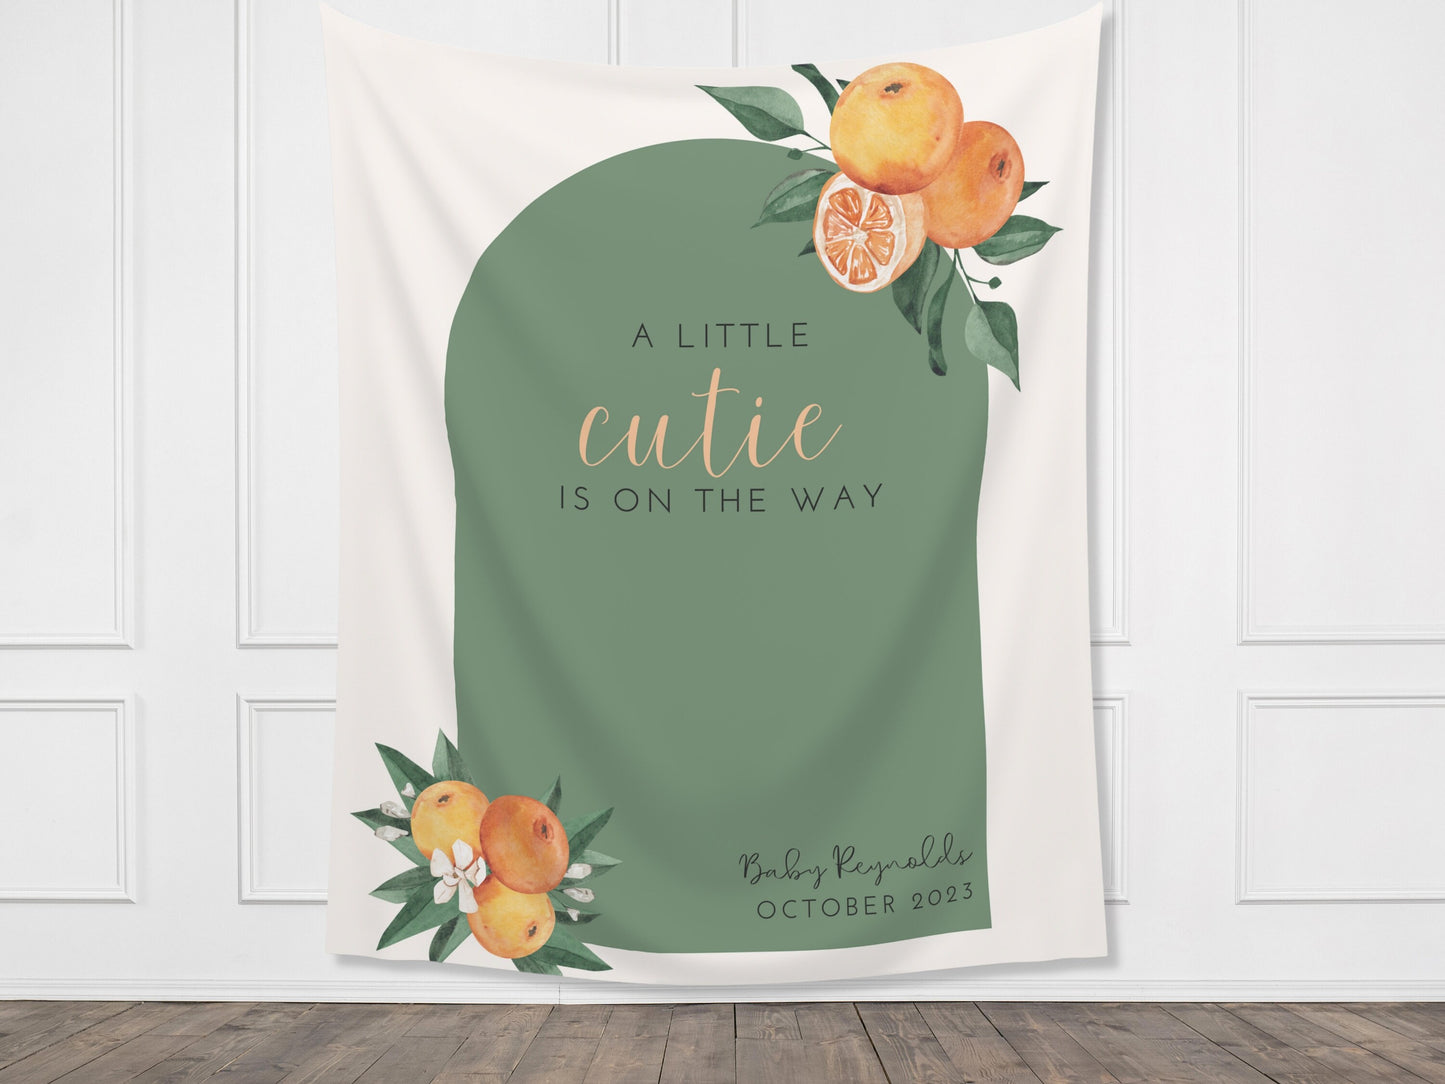 A Little Cutie is on the Way Personalized Baby Shower Backdrop | Custom Orange Citrus Baby Shower or Gender Reveal Backdrop